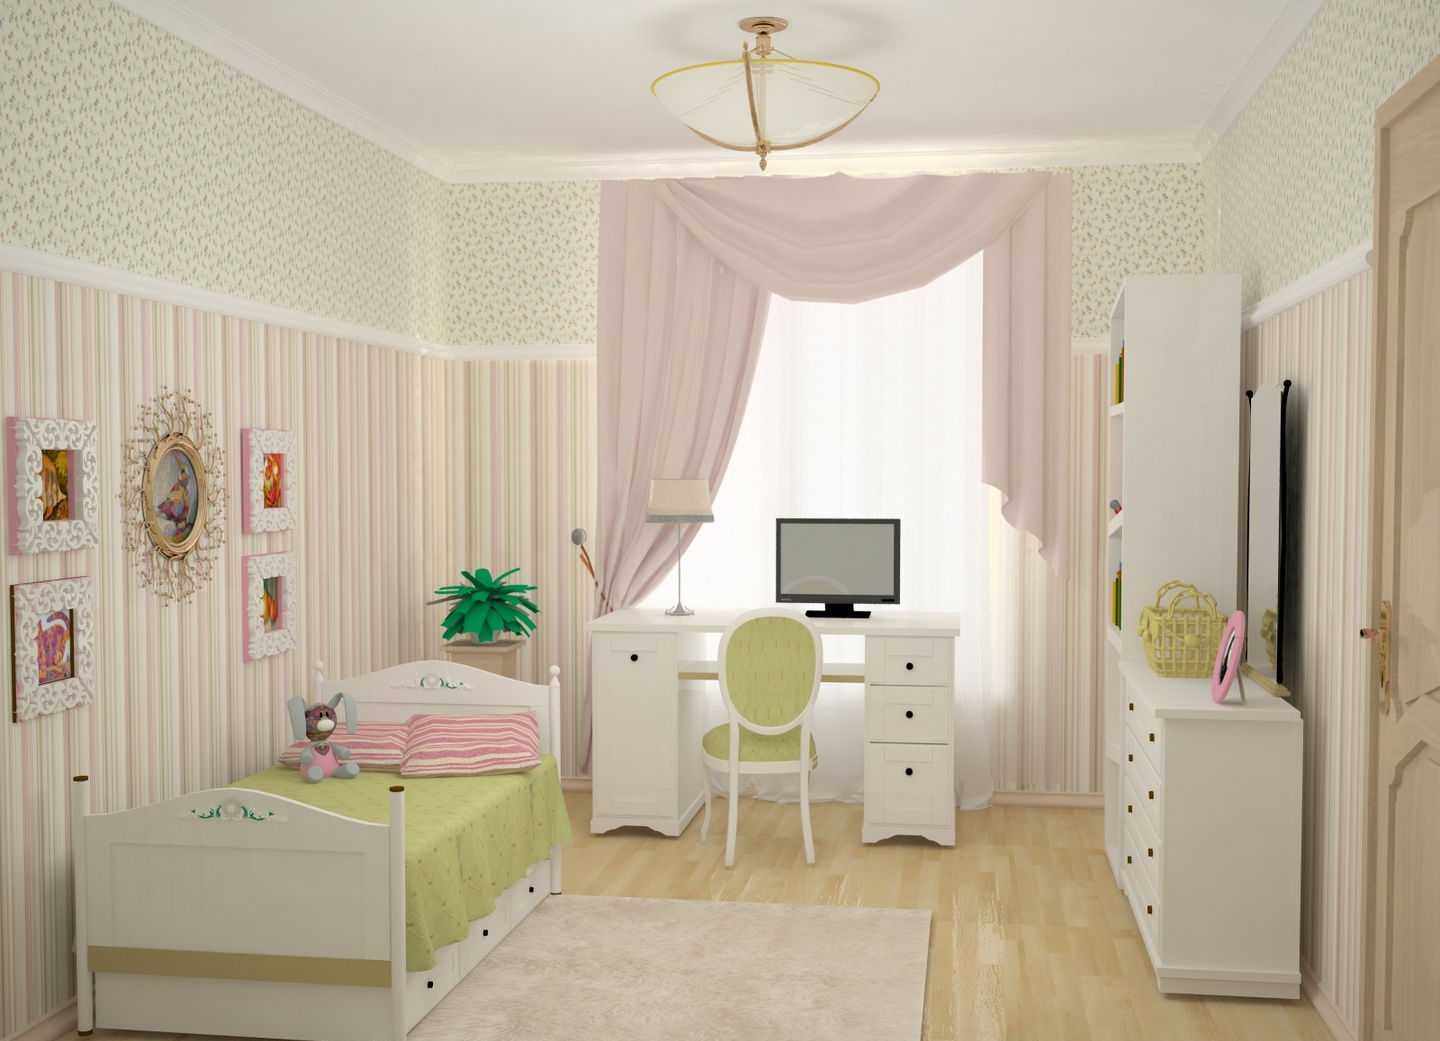 An example of a bright bedroom style for a girl